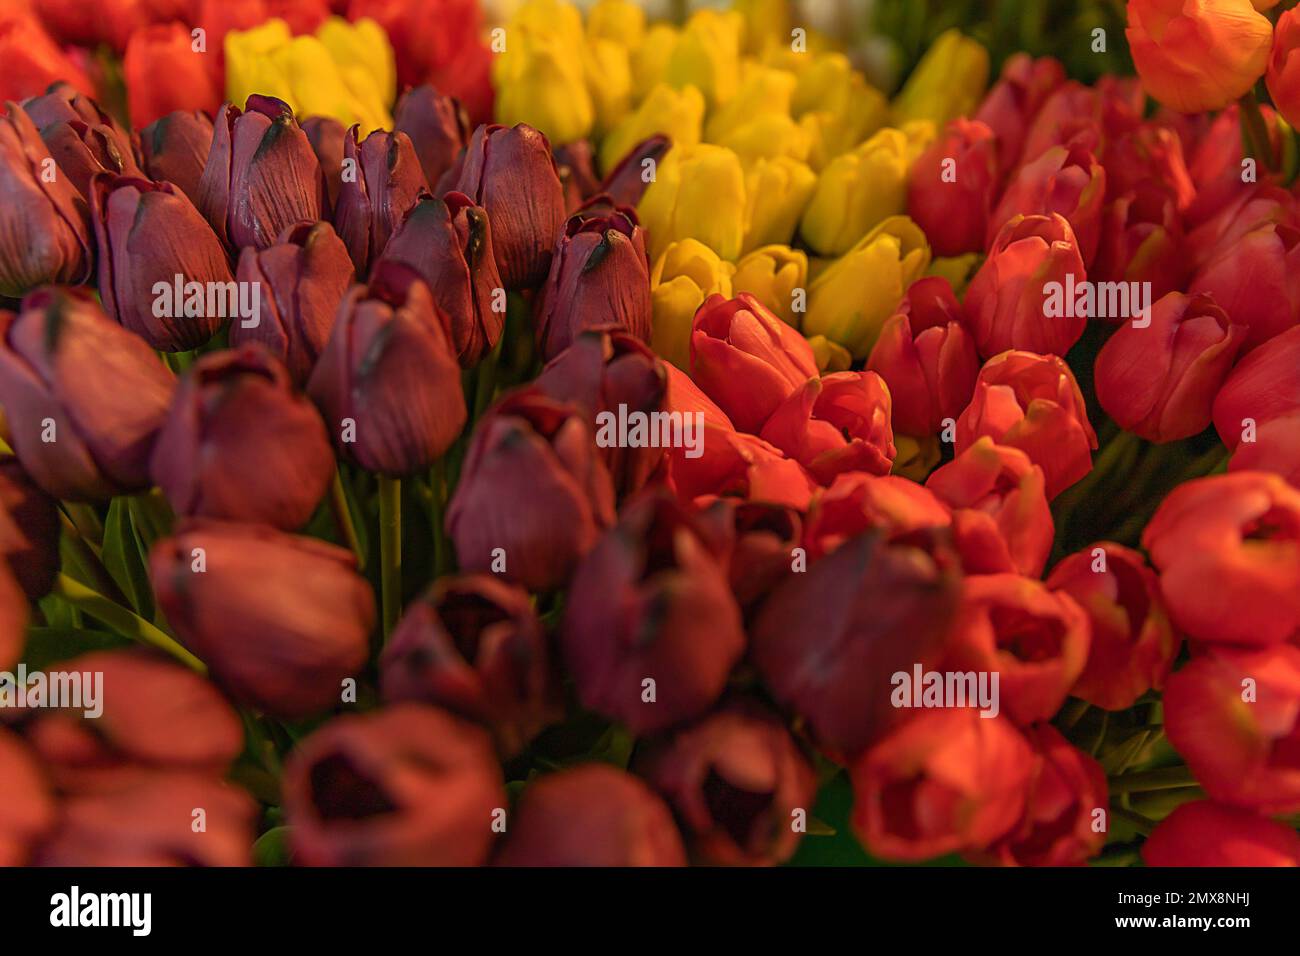 The flower shop in  Amsterdam Airport Schiphol. Tulip is the symbol of Netherlands. Souvenirs from Netherlands. Stock Photo